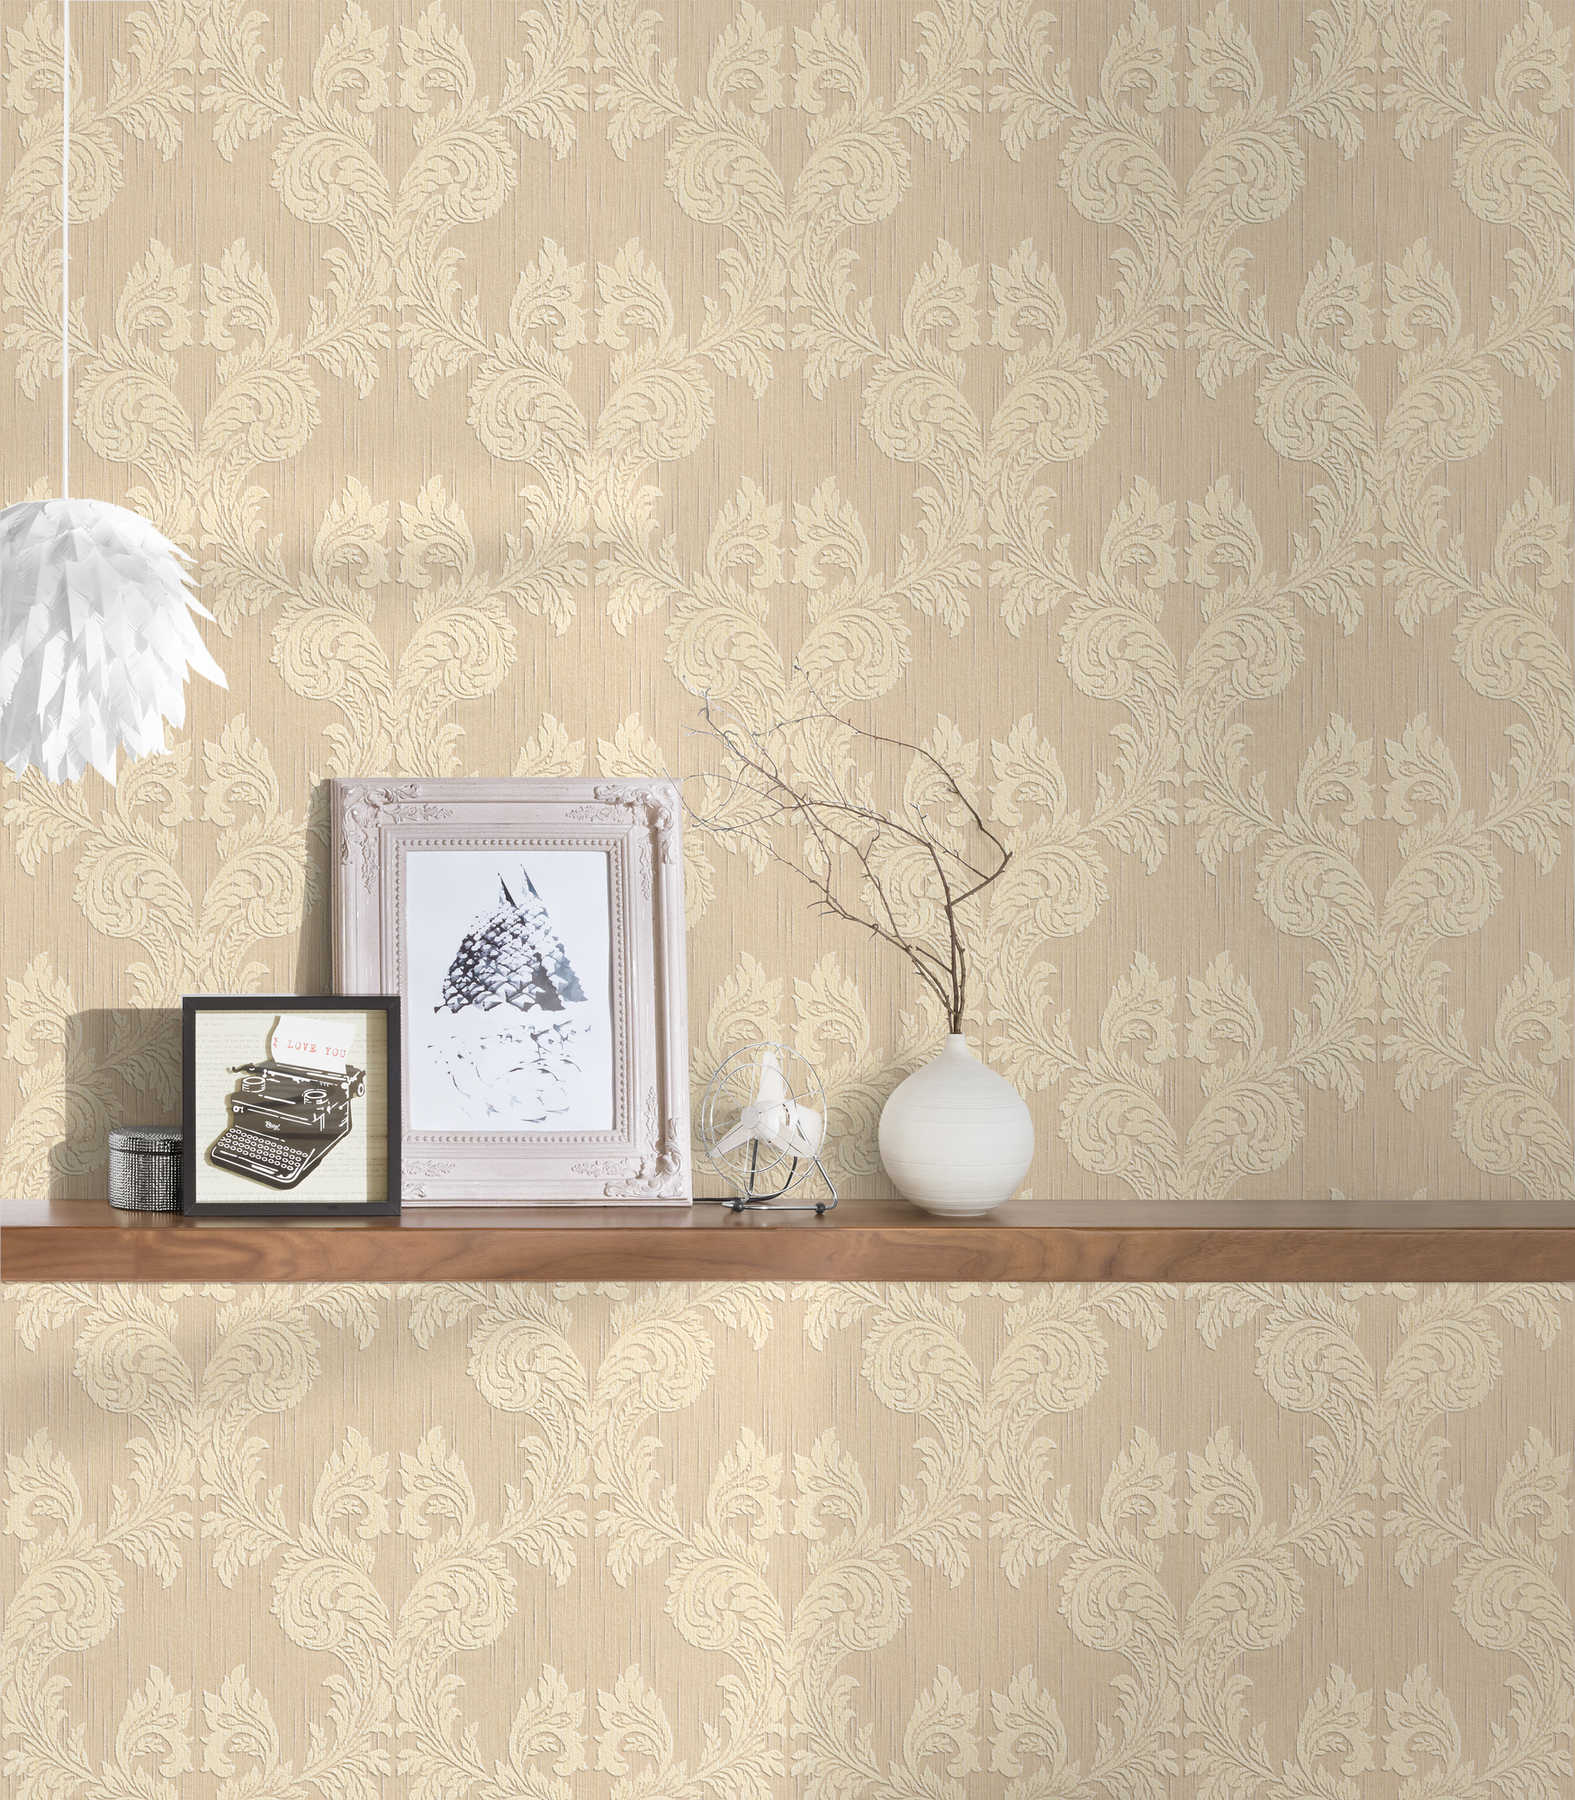             Wallpaper with textile look and ornamental pattern in classic style - beige
        